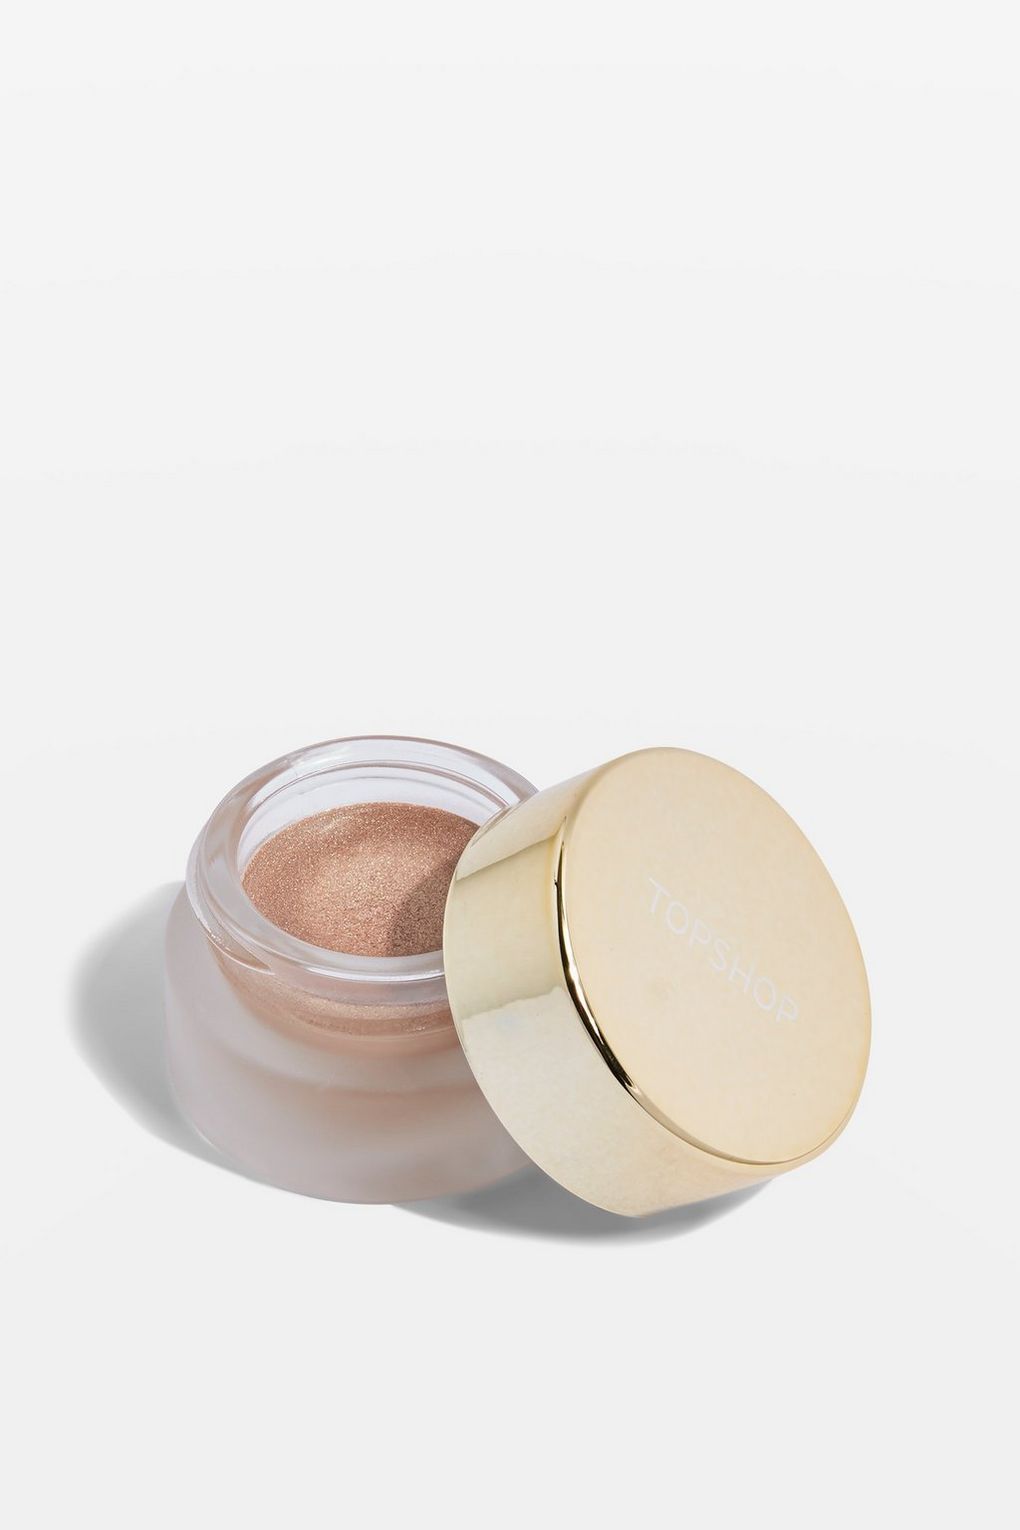 21 Topshop Beauty Products to Buy This Summer | Who What Wear